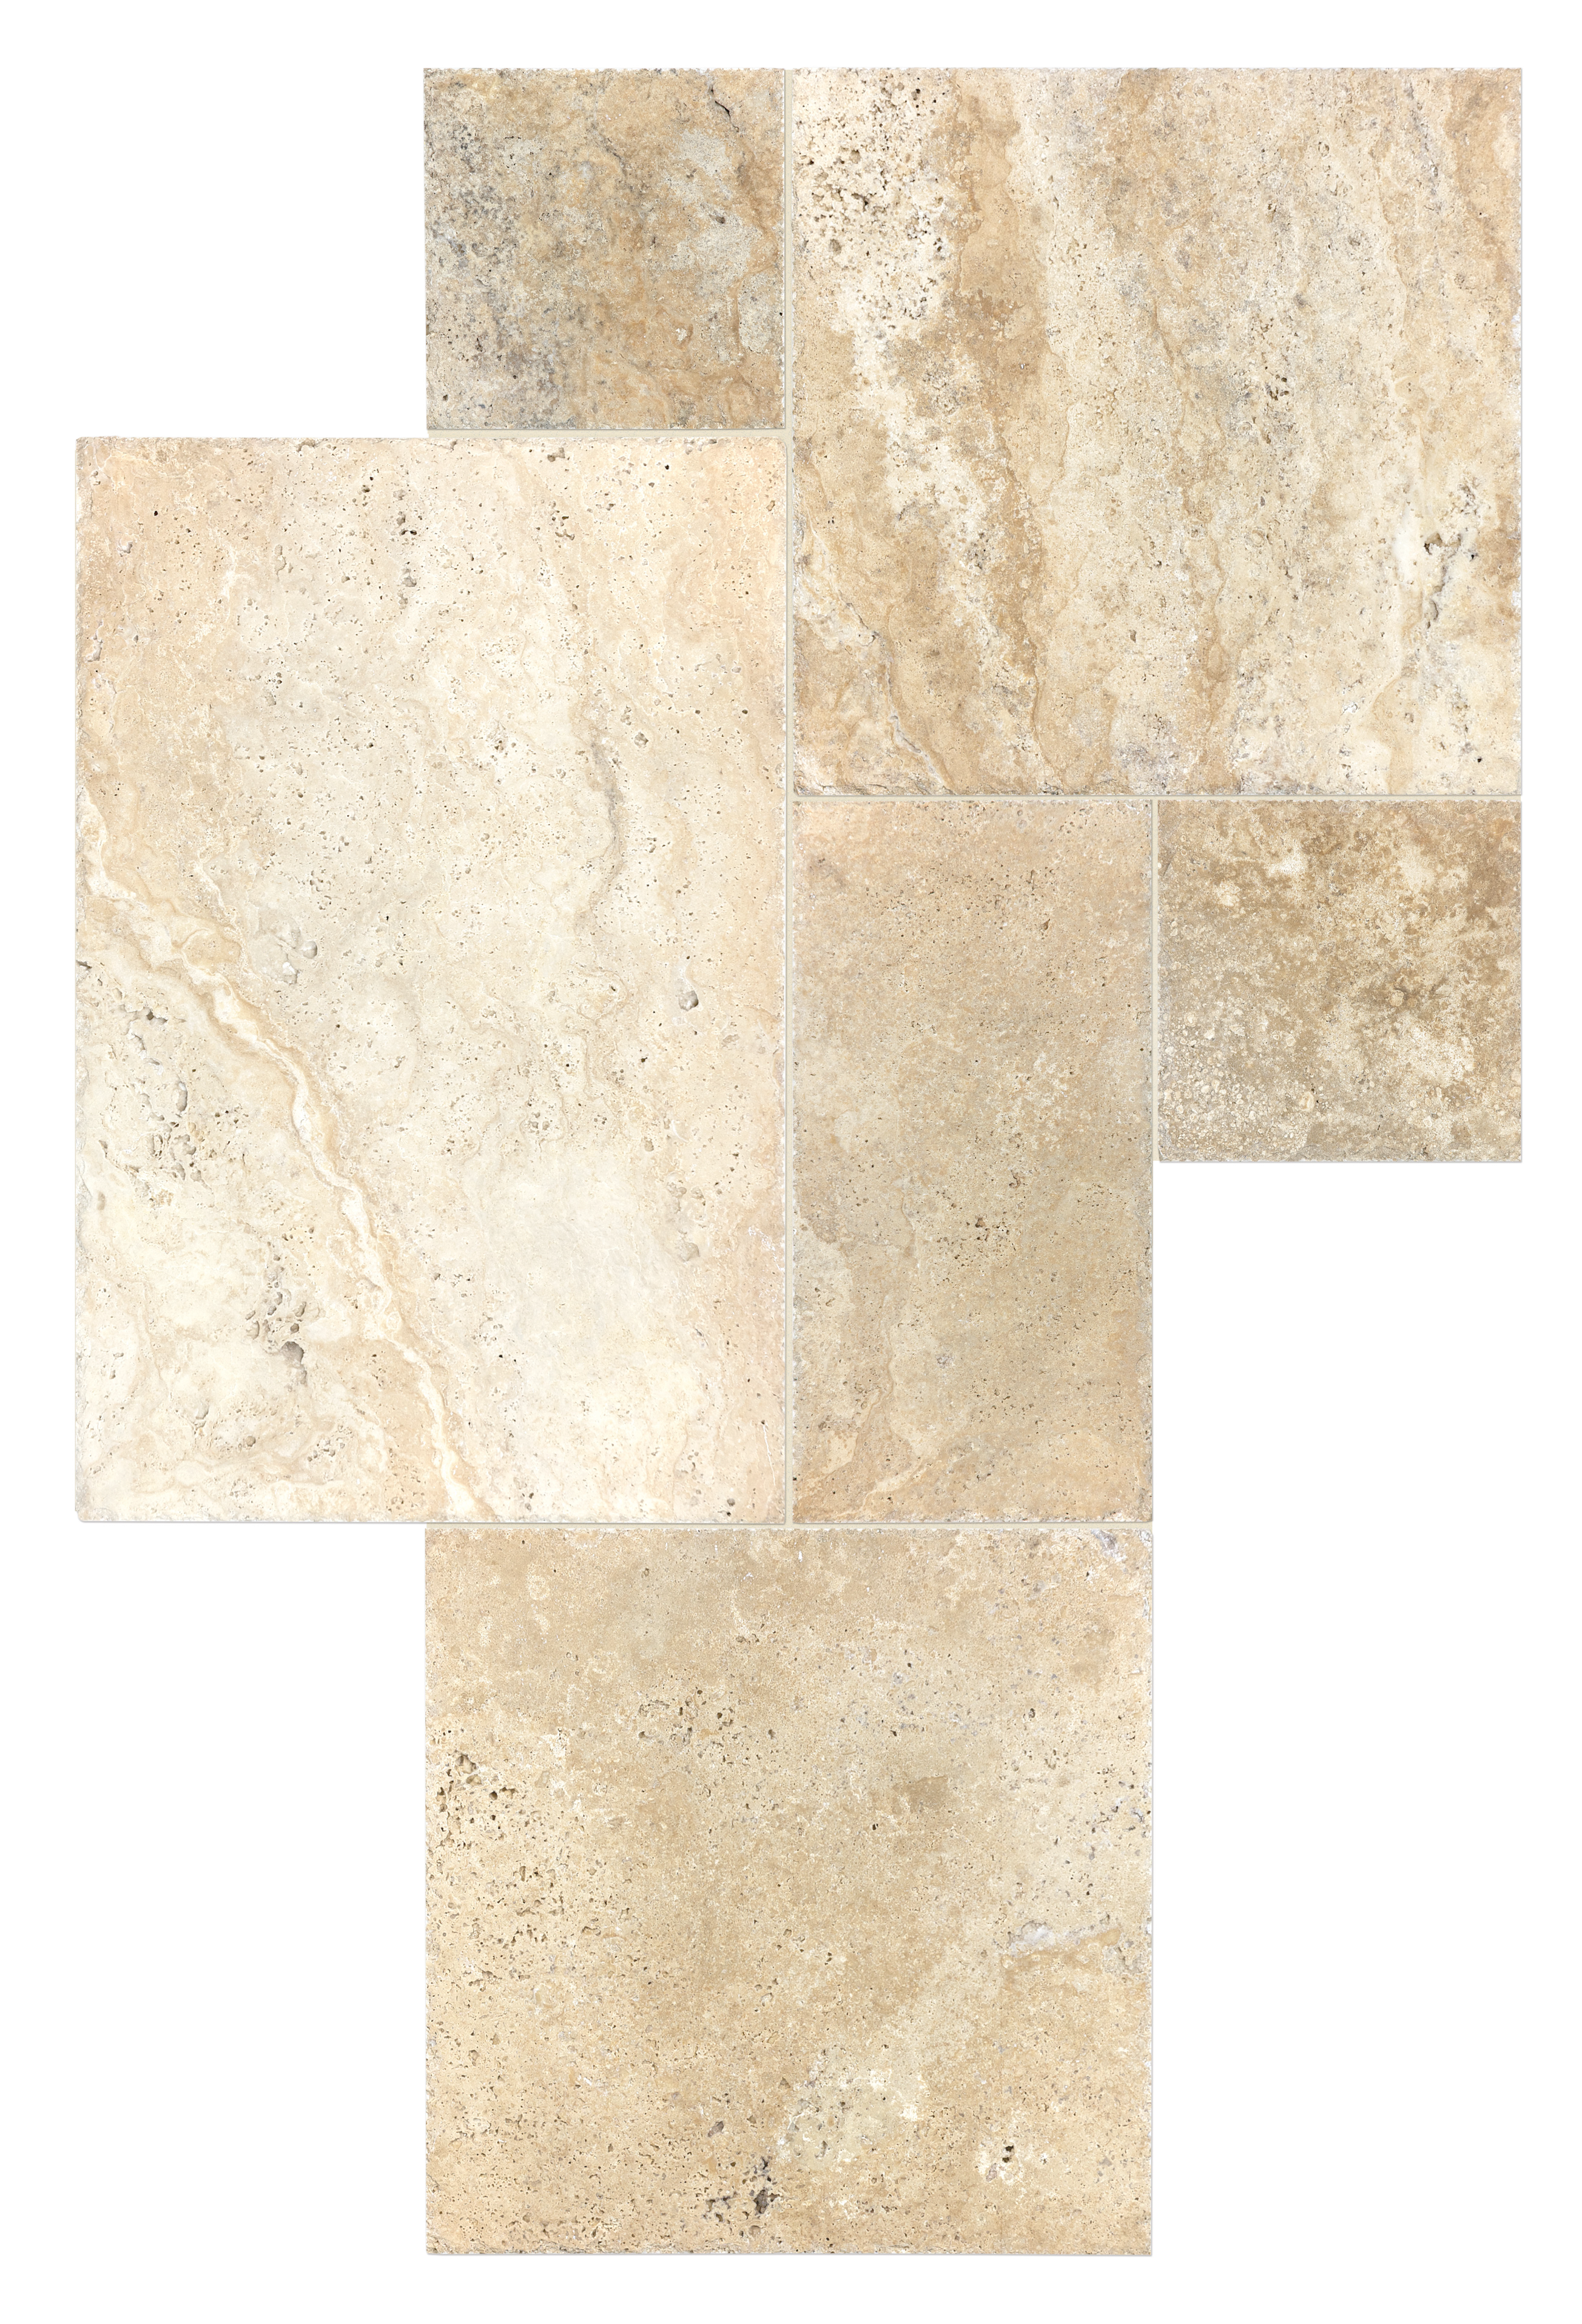 travertine pattern natural stone field tile from picasso anatolia collection distributed by surface group international brushed finish chiseled edge rectangle shape